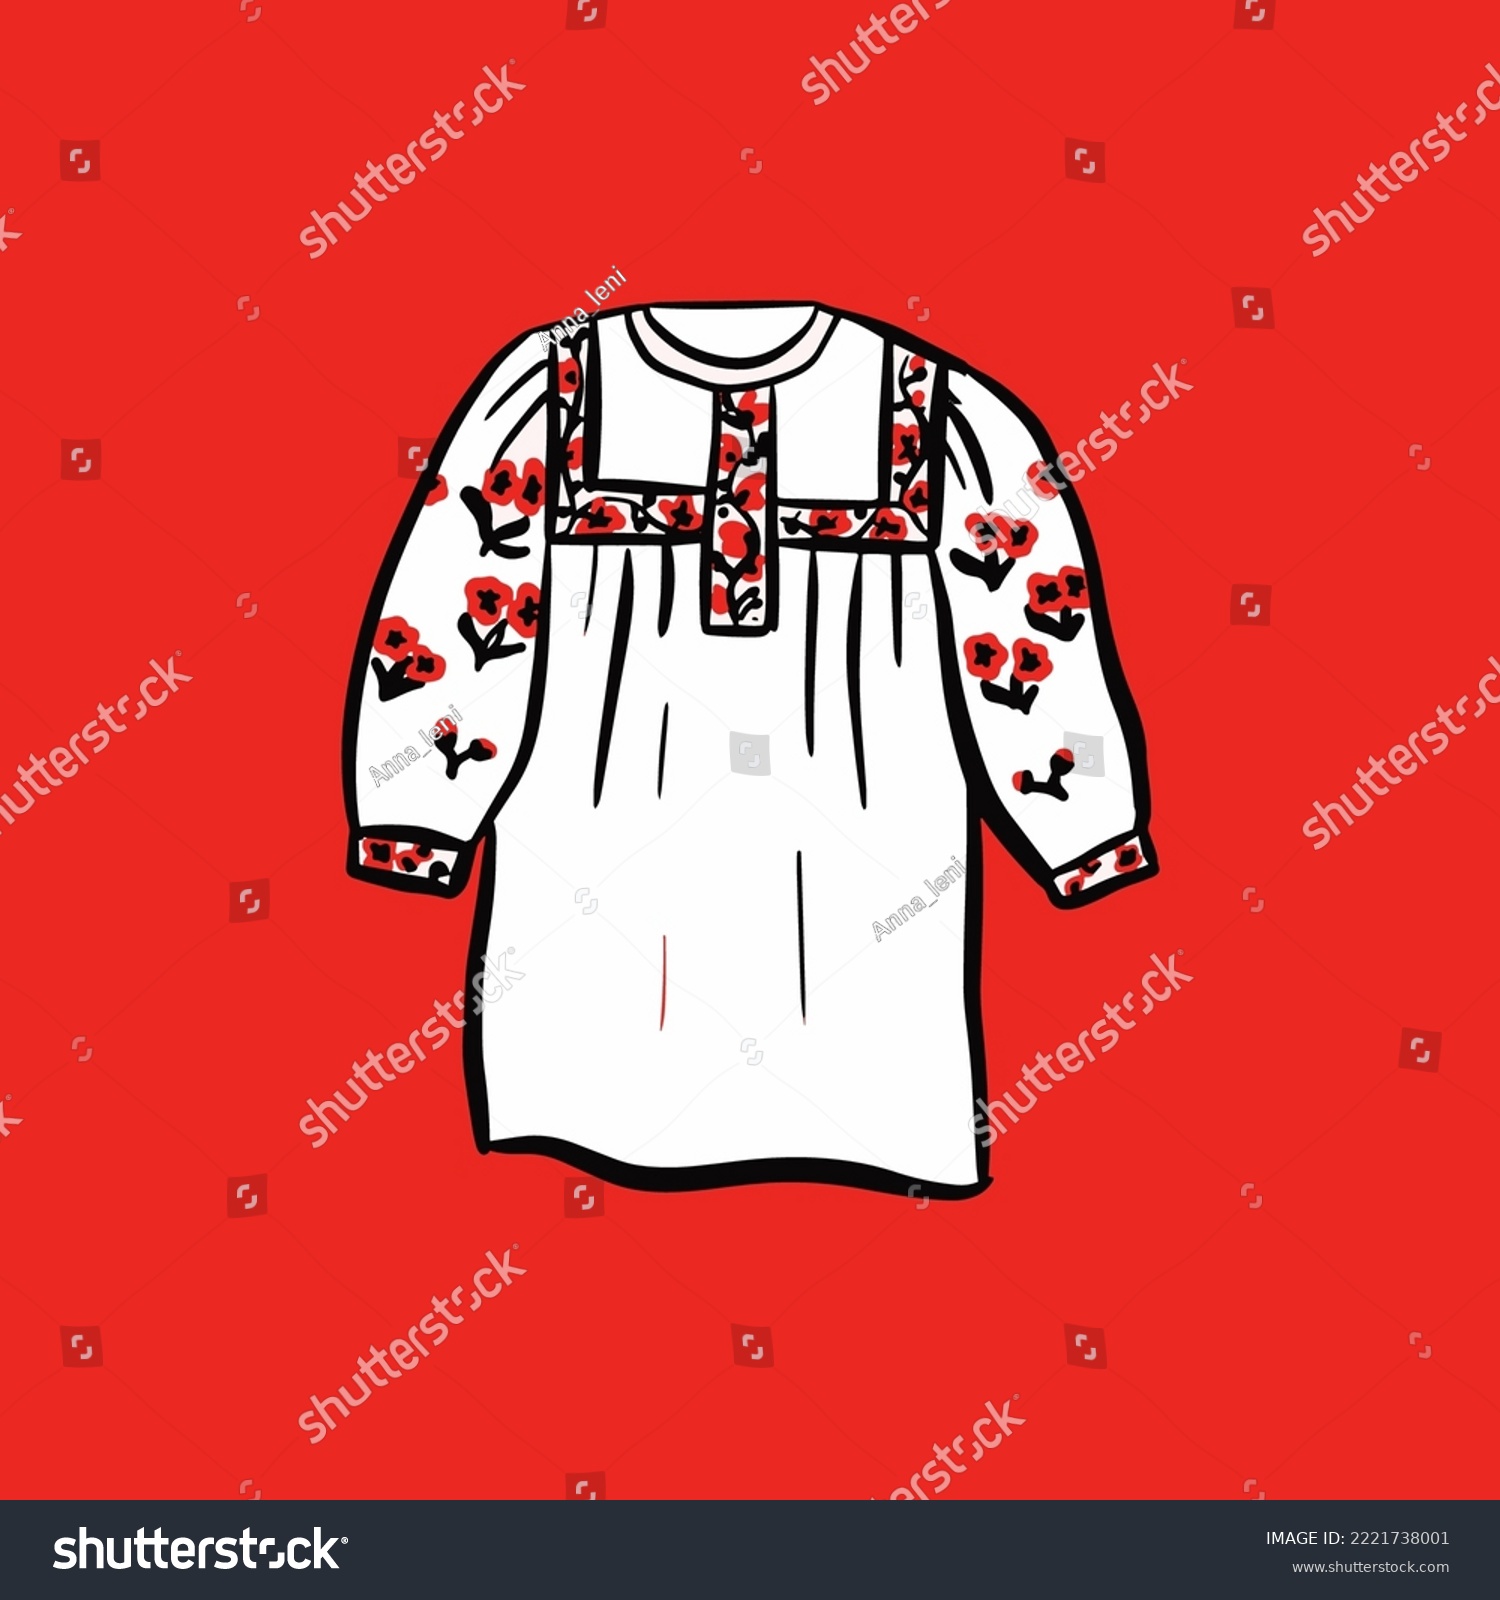 SVG of Woman Ukraine Embroidery T Shirt. Vector Illustration of Sketch Doodle Hand drawn Cultural Clothes. svg